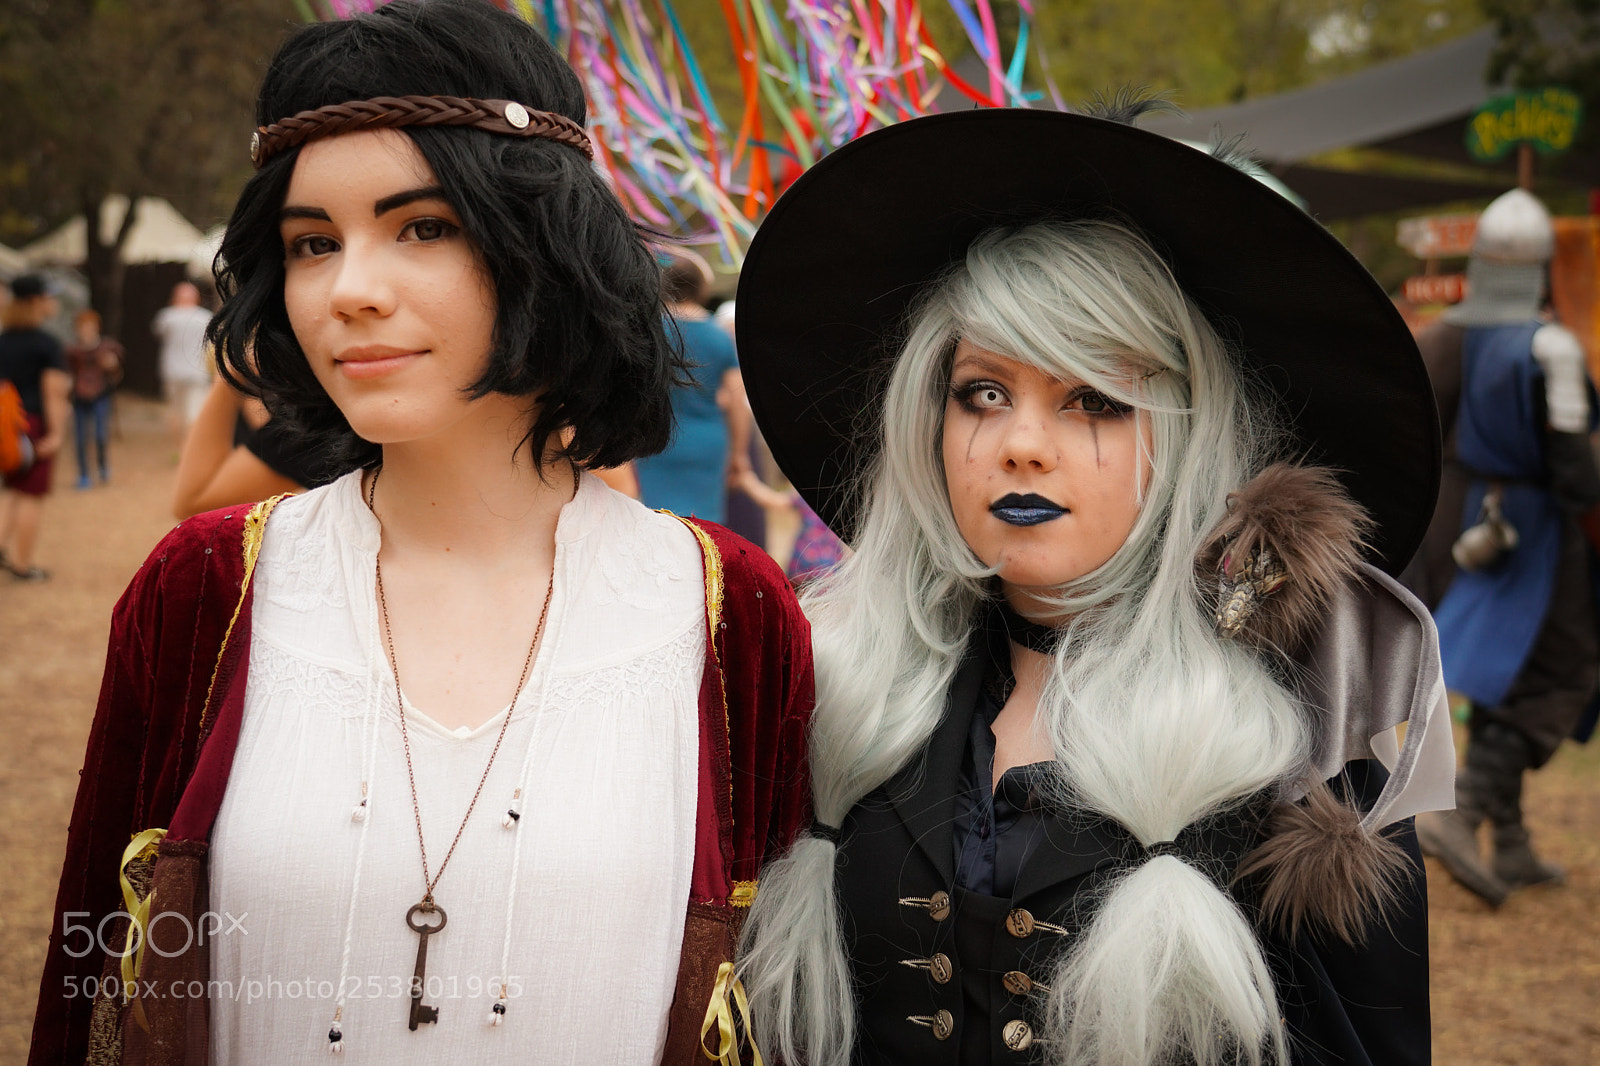 Sony a6500 sample photo. Sherwood forest faire photography